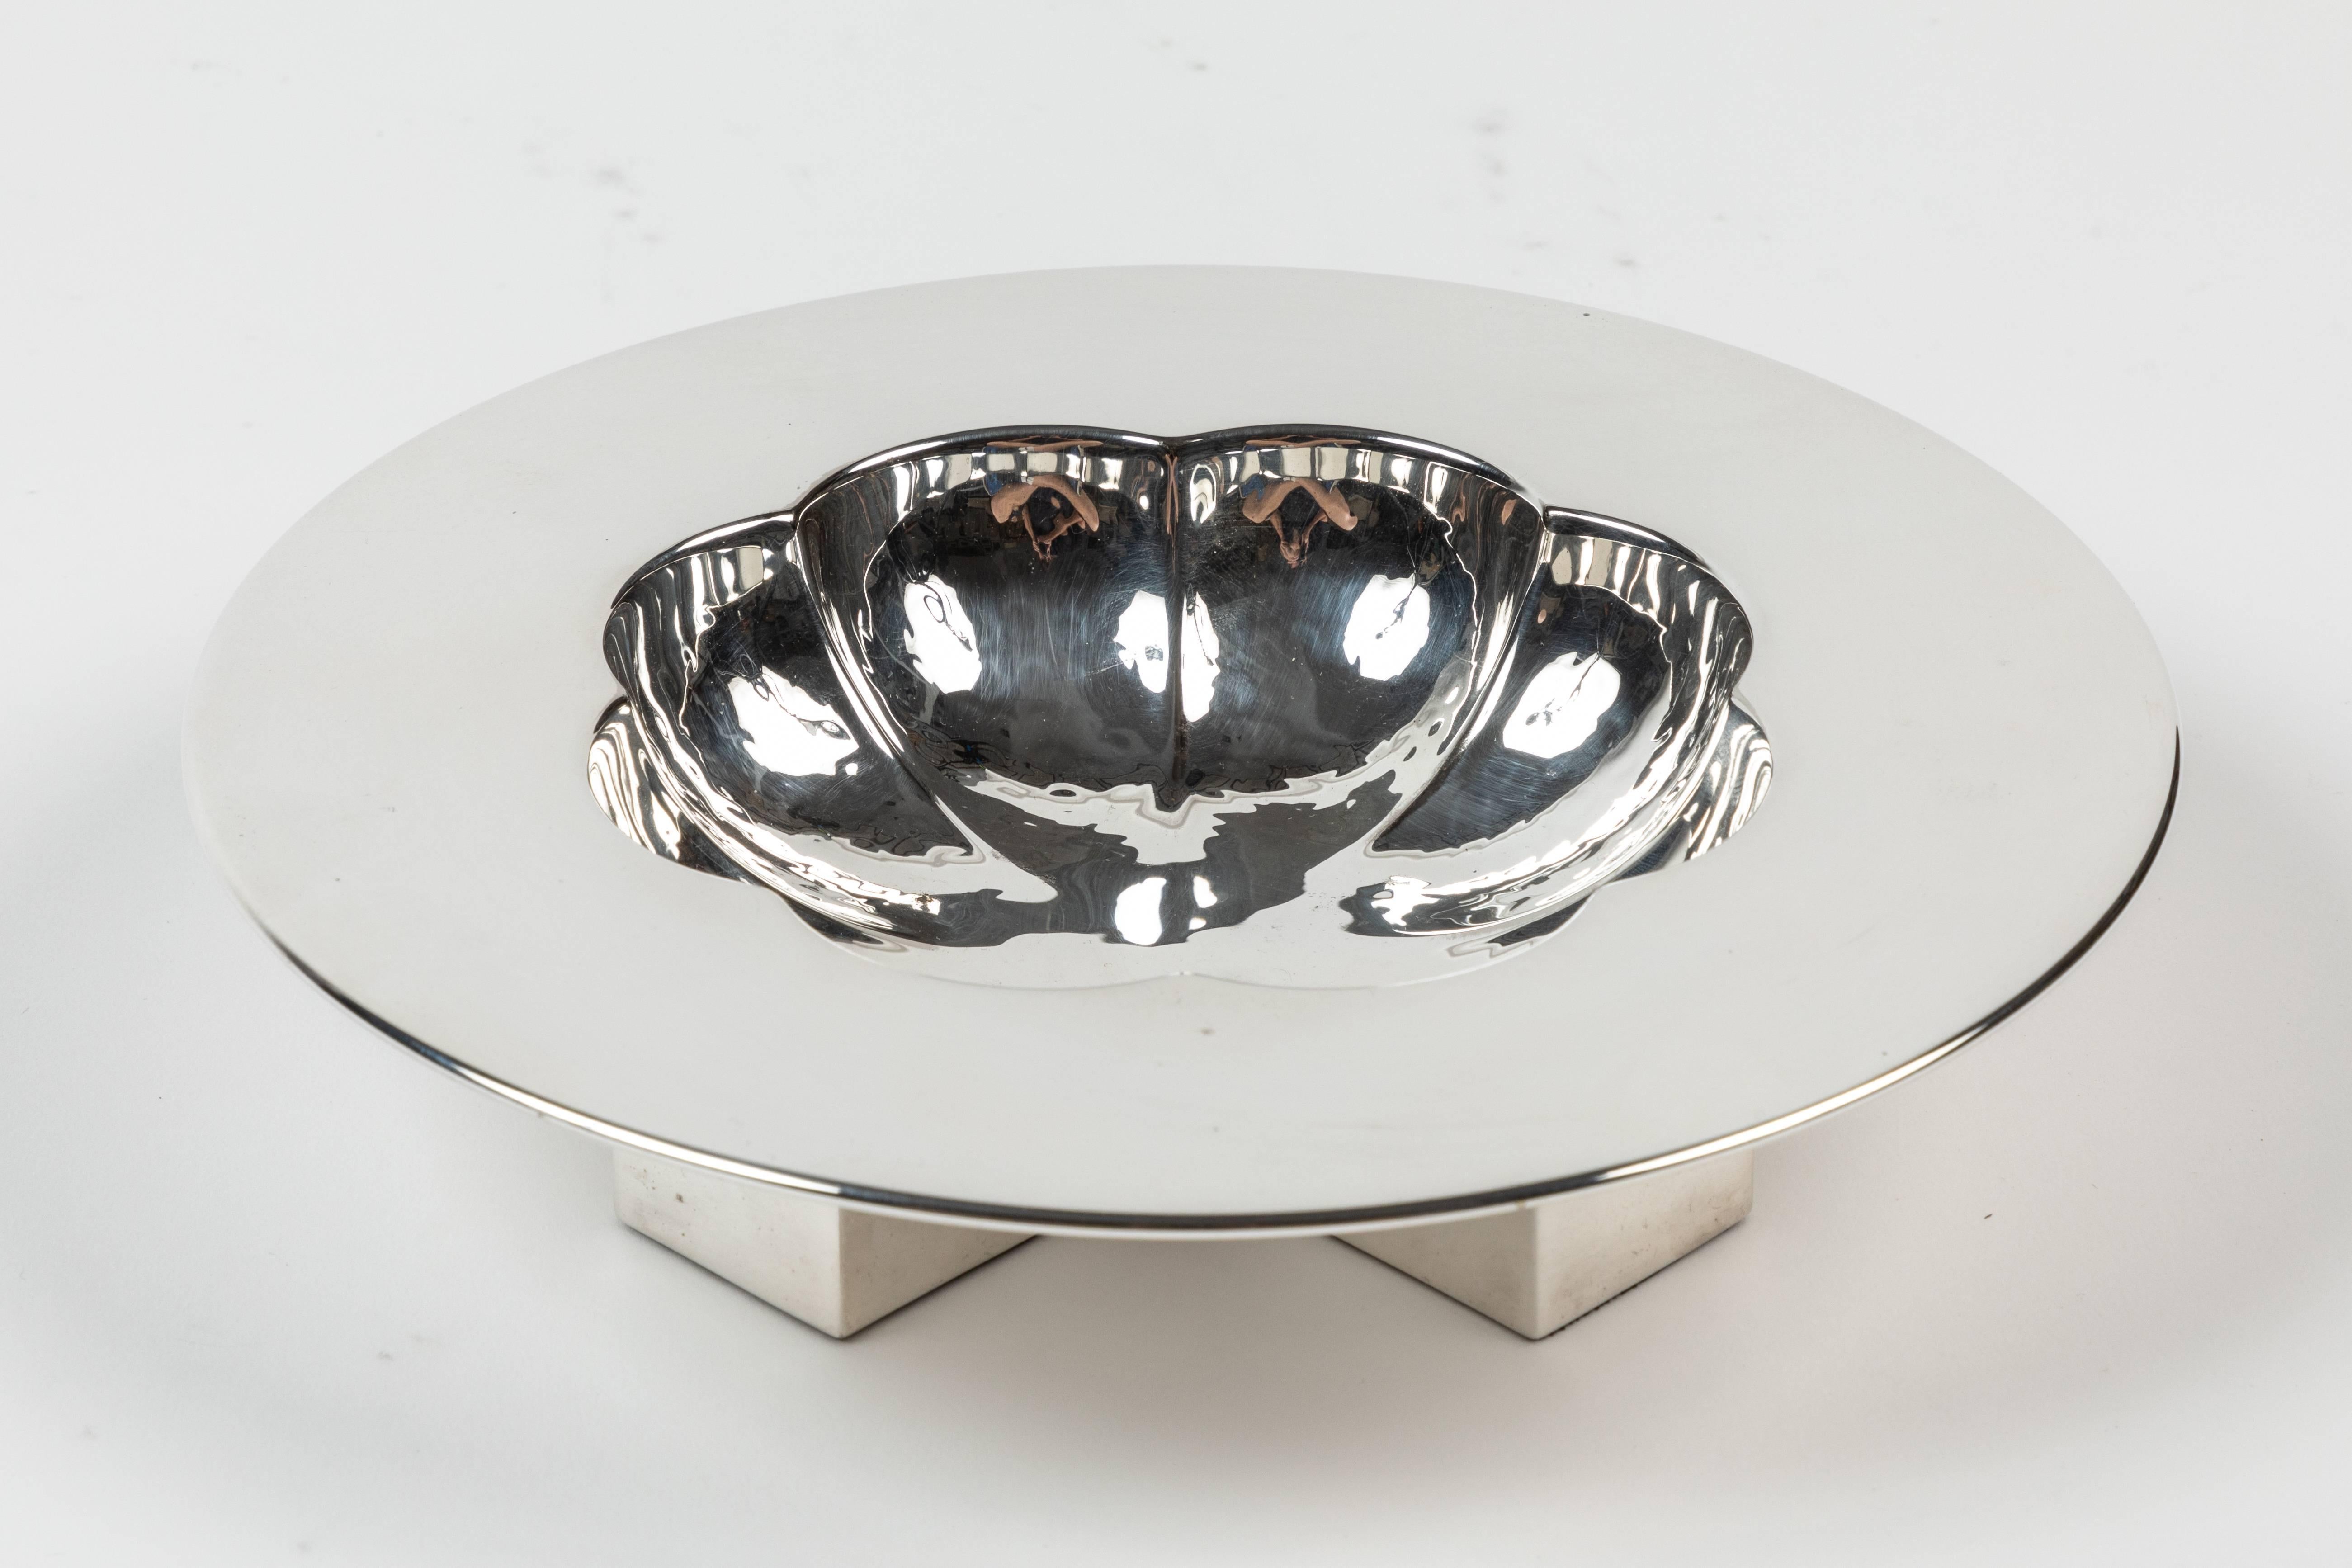 Late 20th Century Silver-Plated Scalloped Nut Dish by Michael Graves for Swid Powell